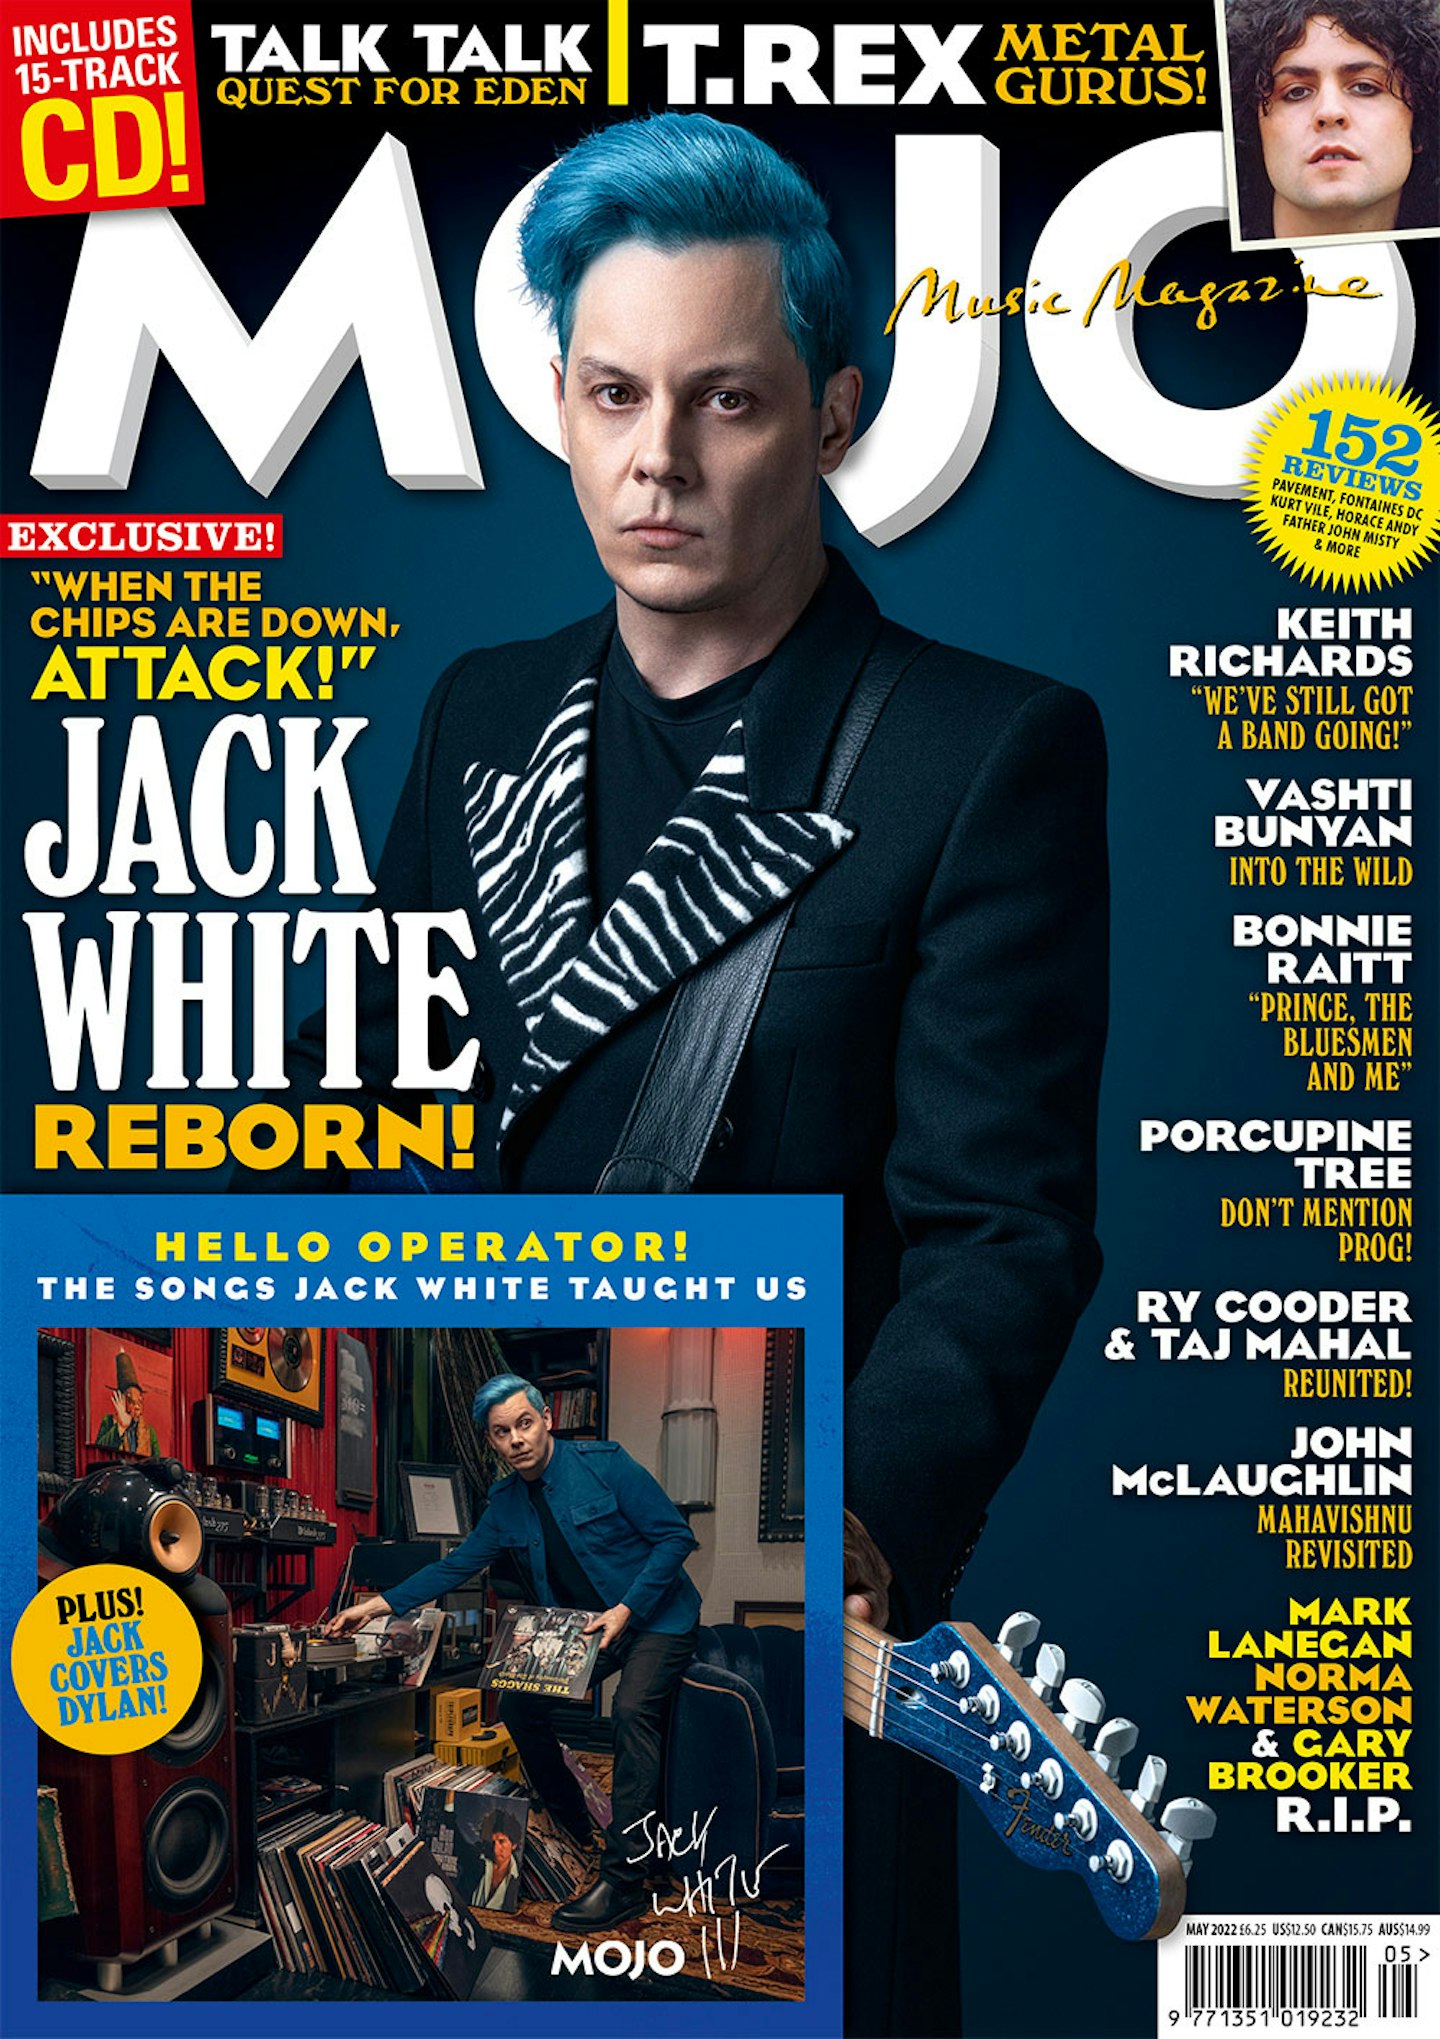 MOJO 342, with blue-haired Jack White on the cover